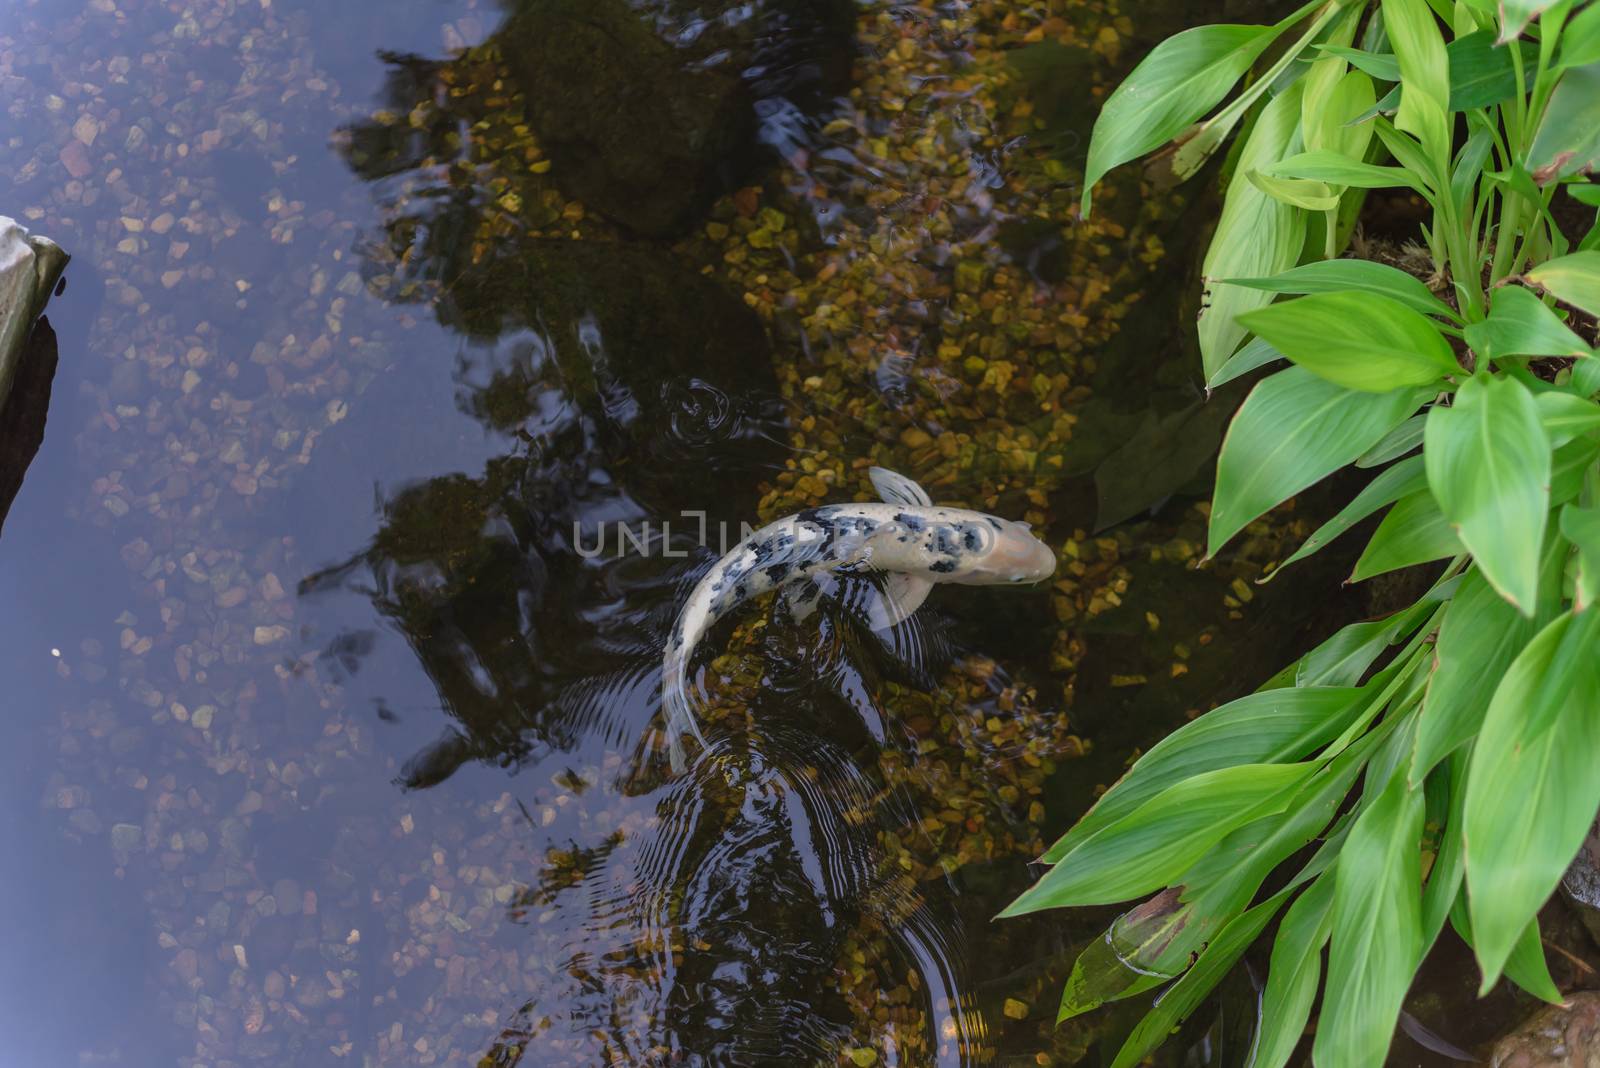 One koi fish swimming in landscaping pond or water garden near Dallas, Texas, America